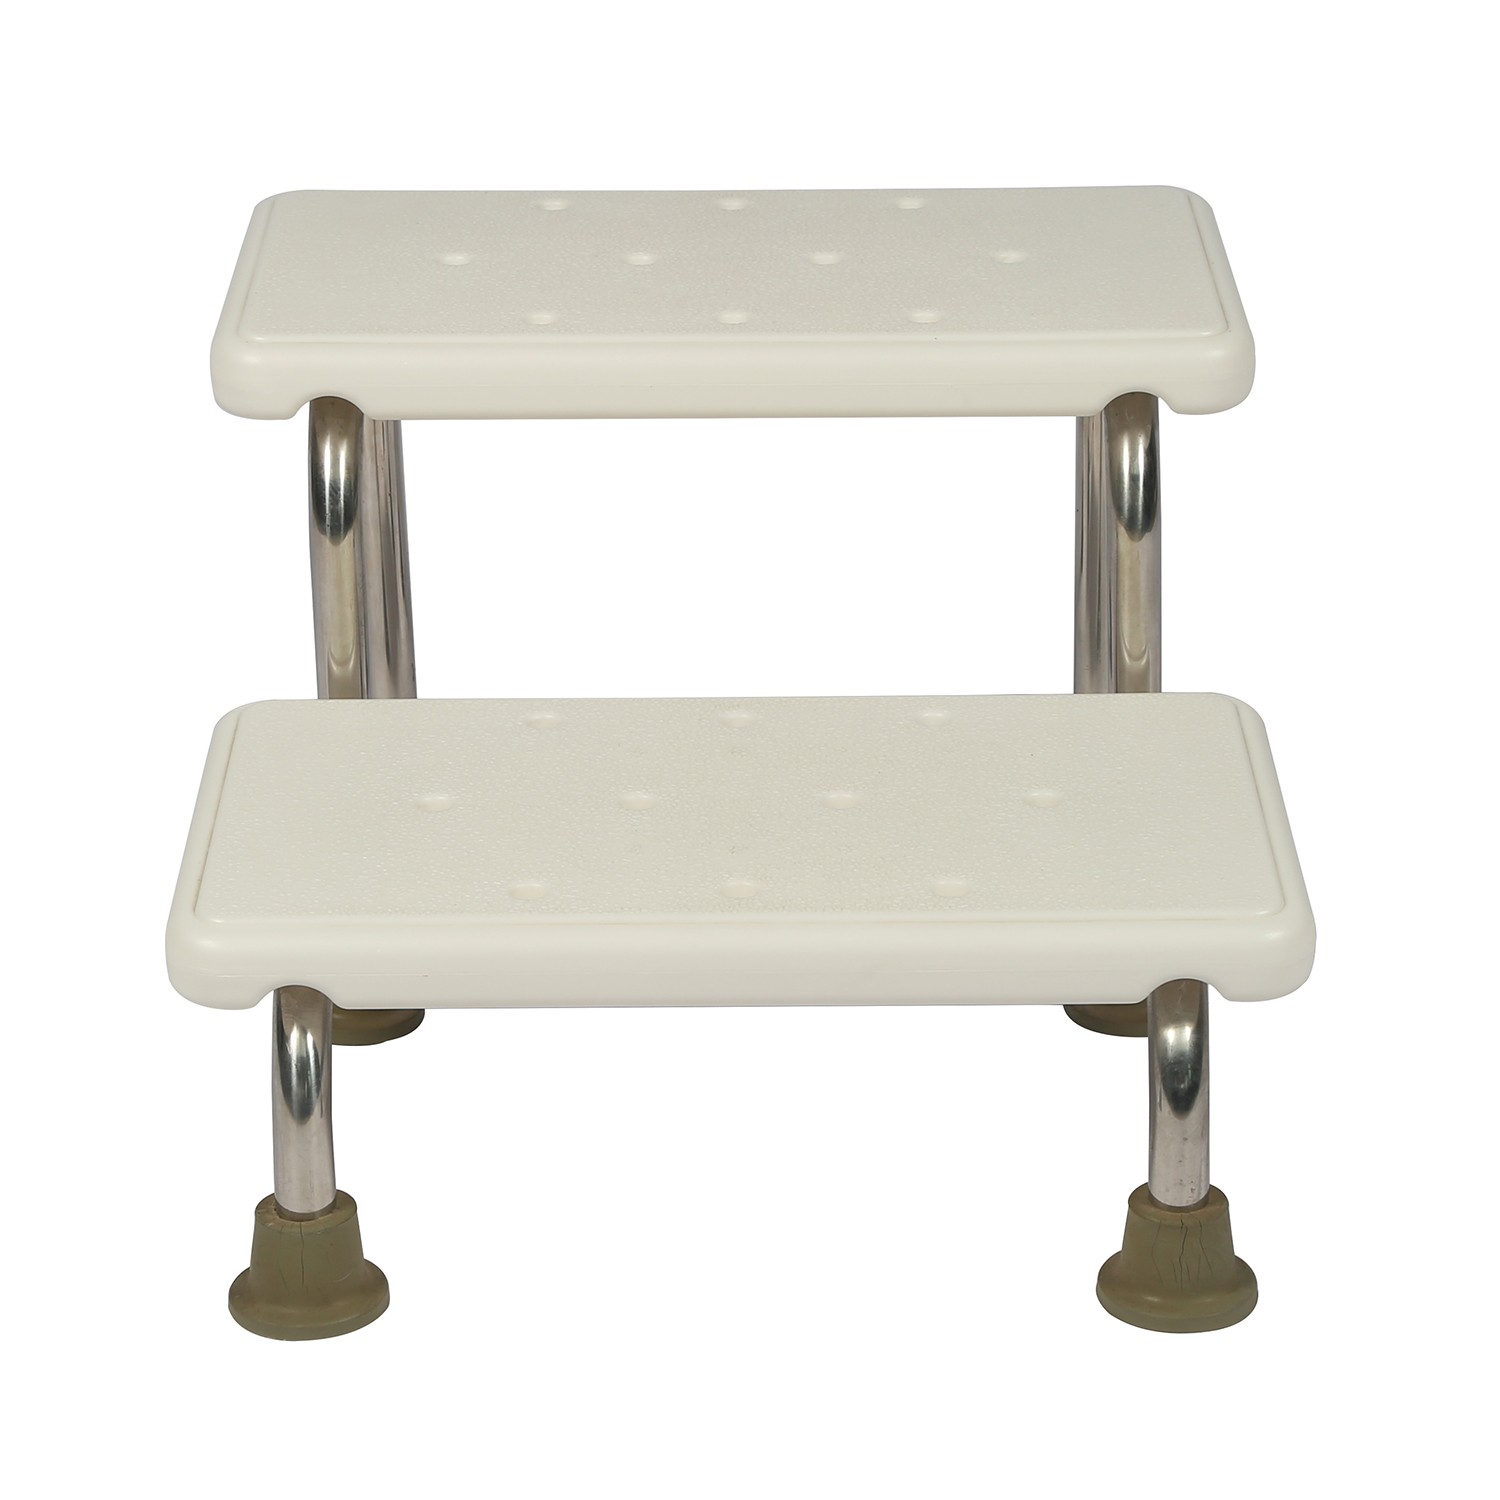 foot step commode chair